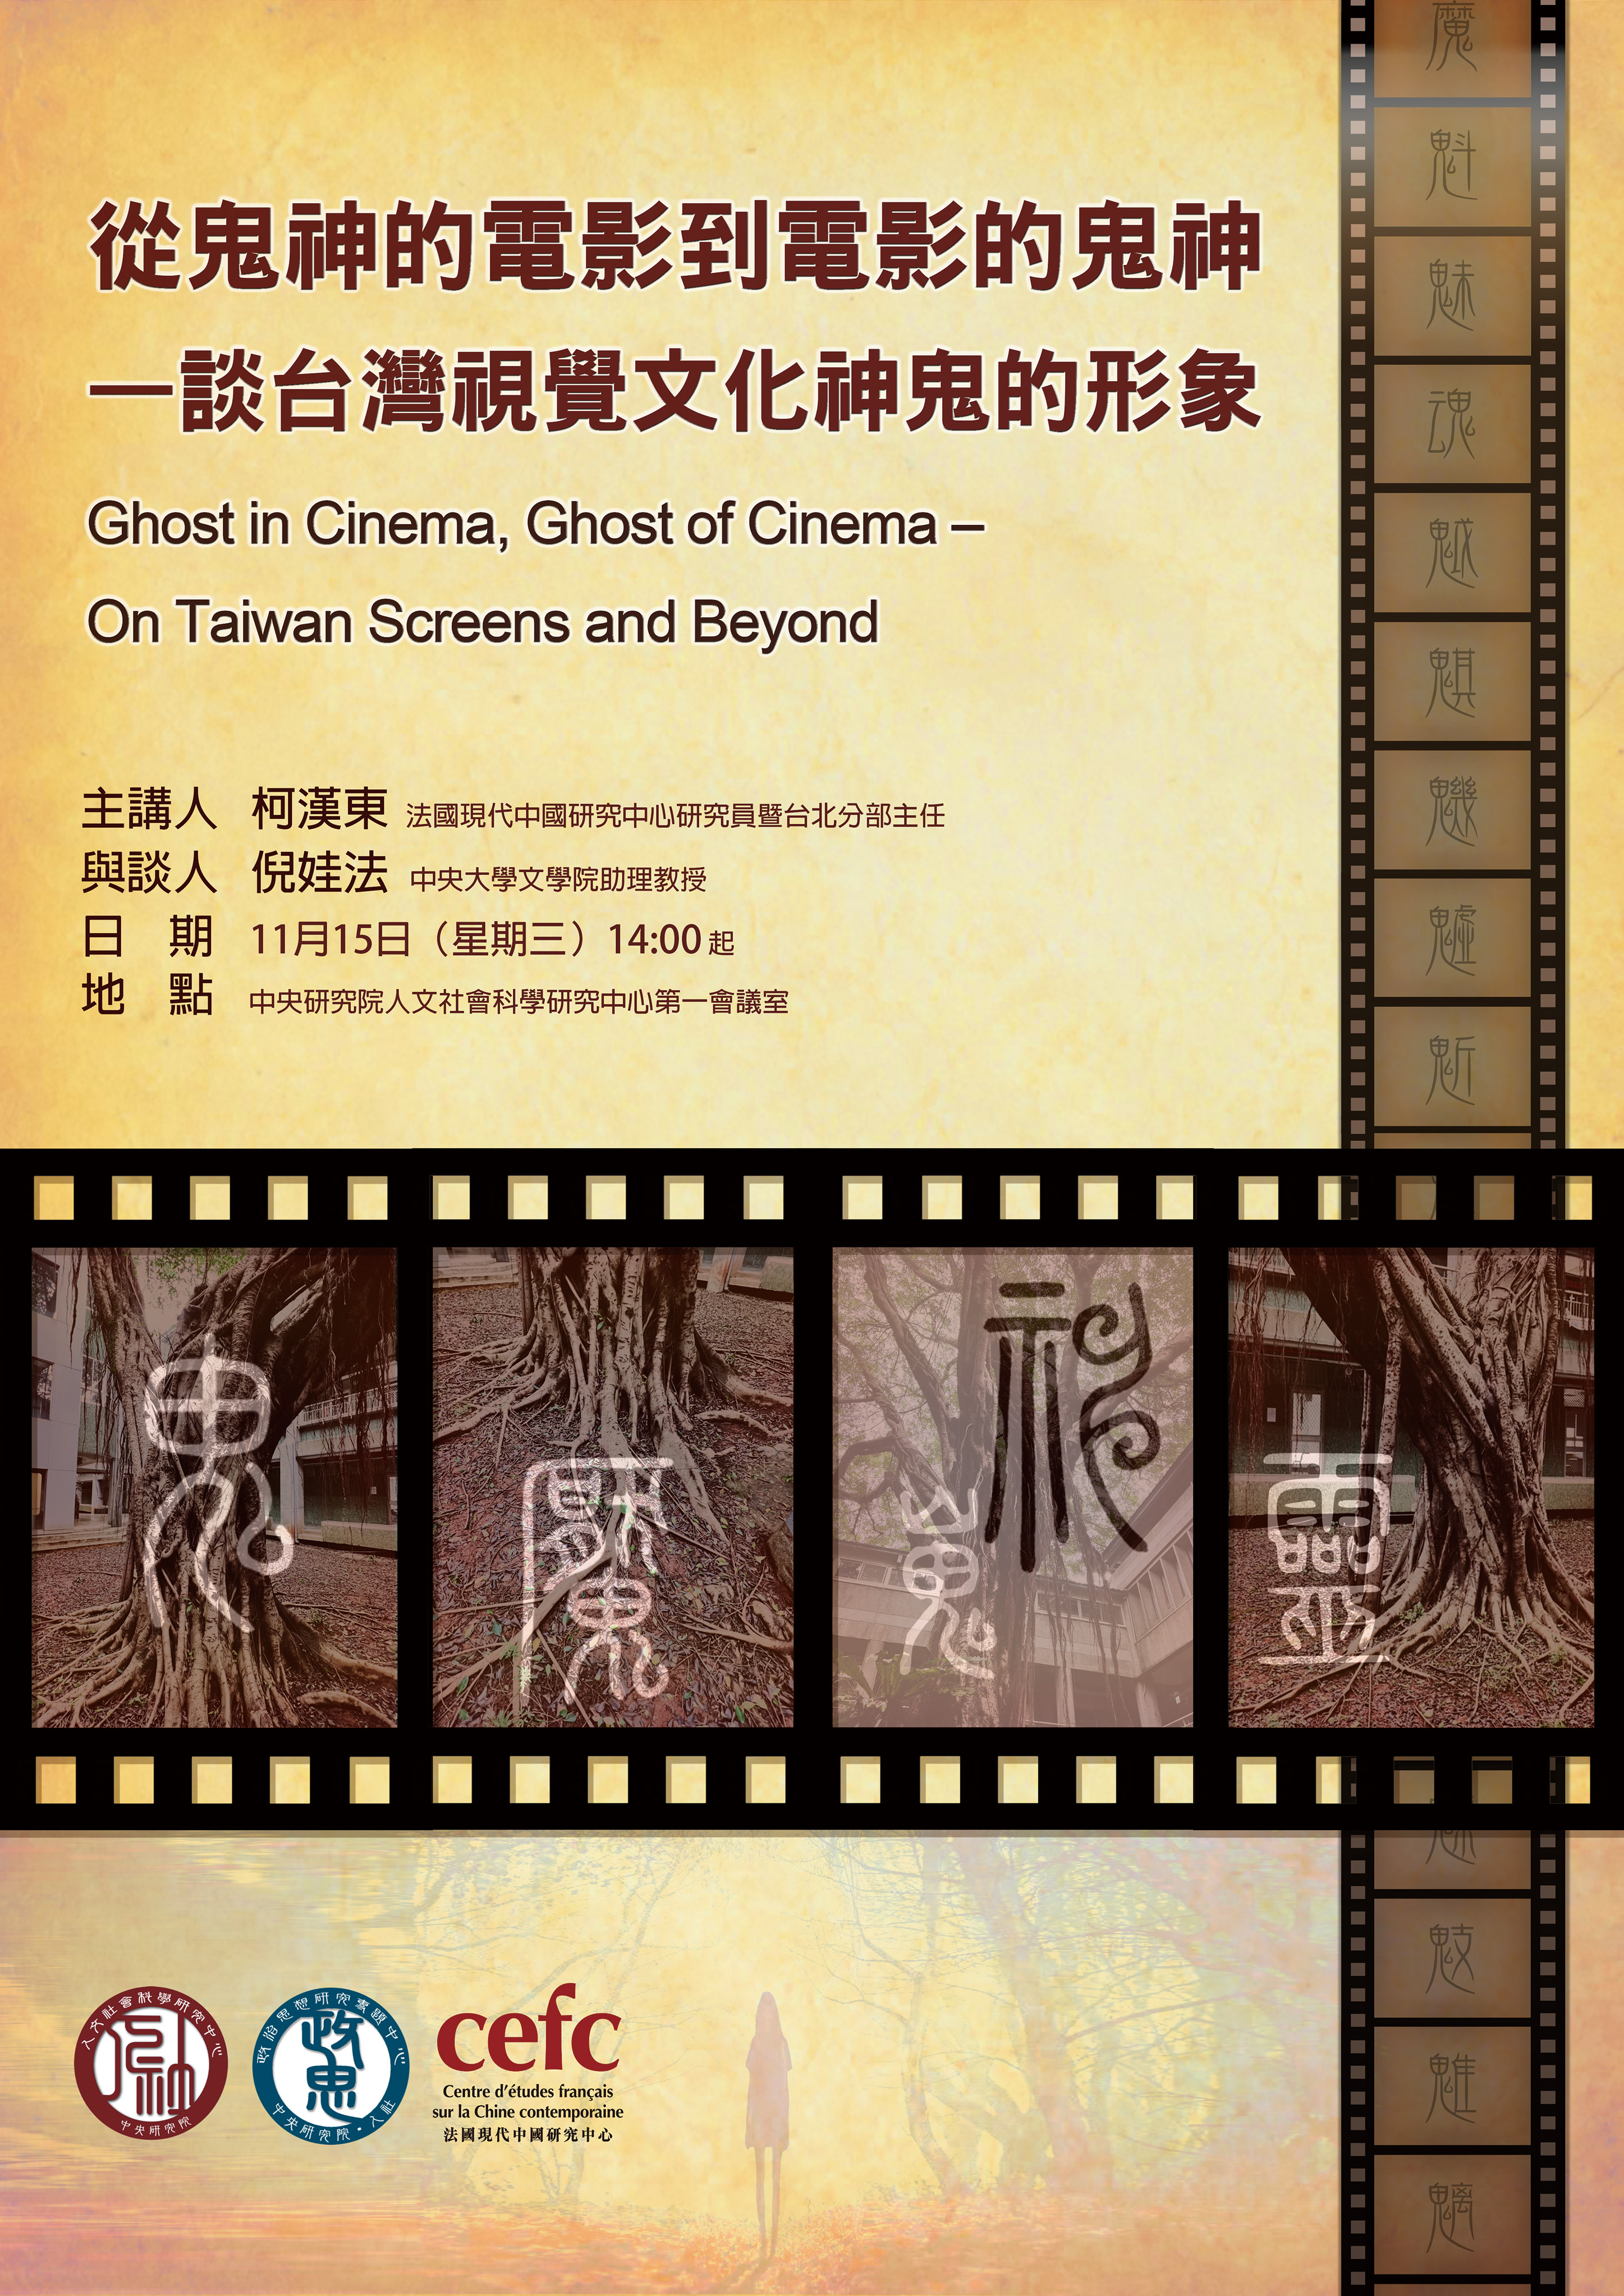 *Ghost in Cinema, Ghost of Cinema – On Taiwan Screens and Beyond 從鬼神的電影到電影的鬼神 